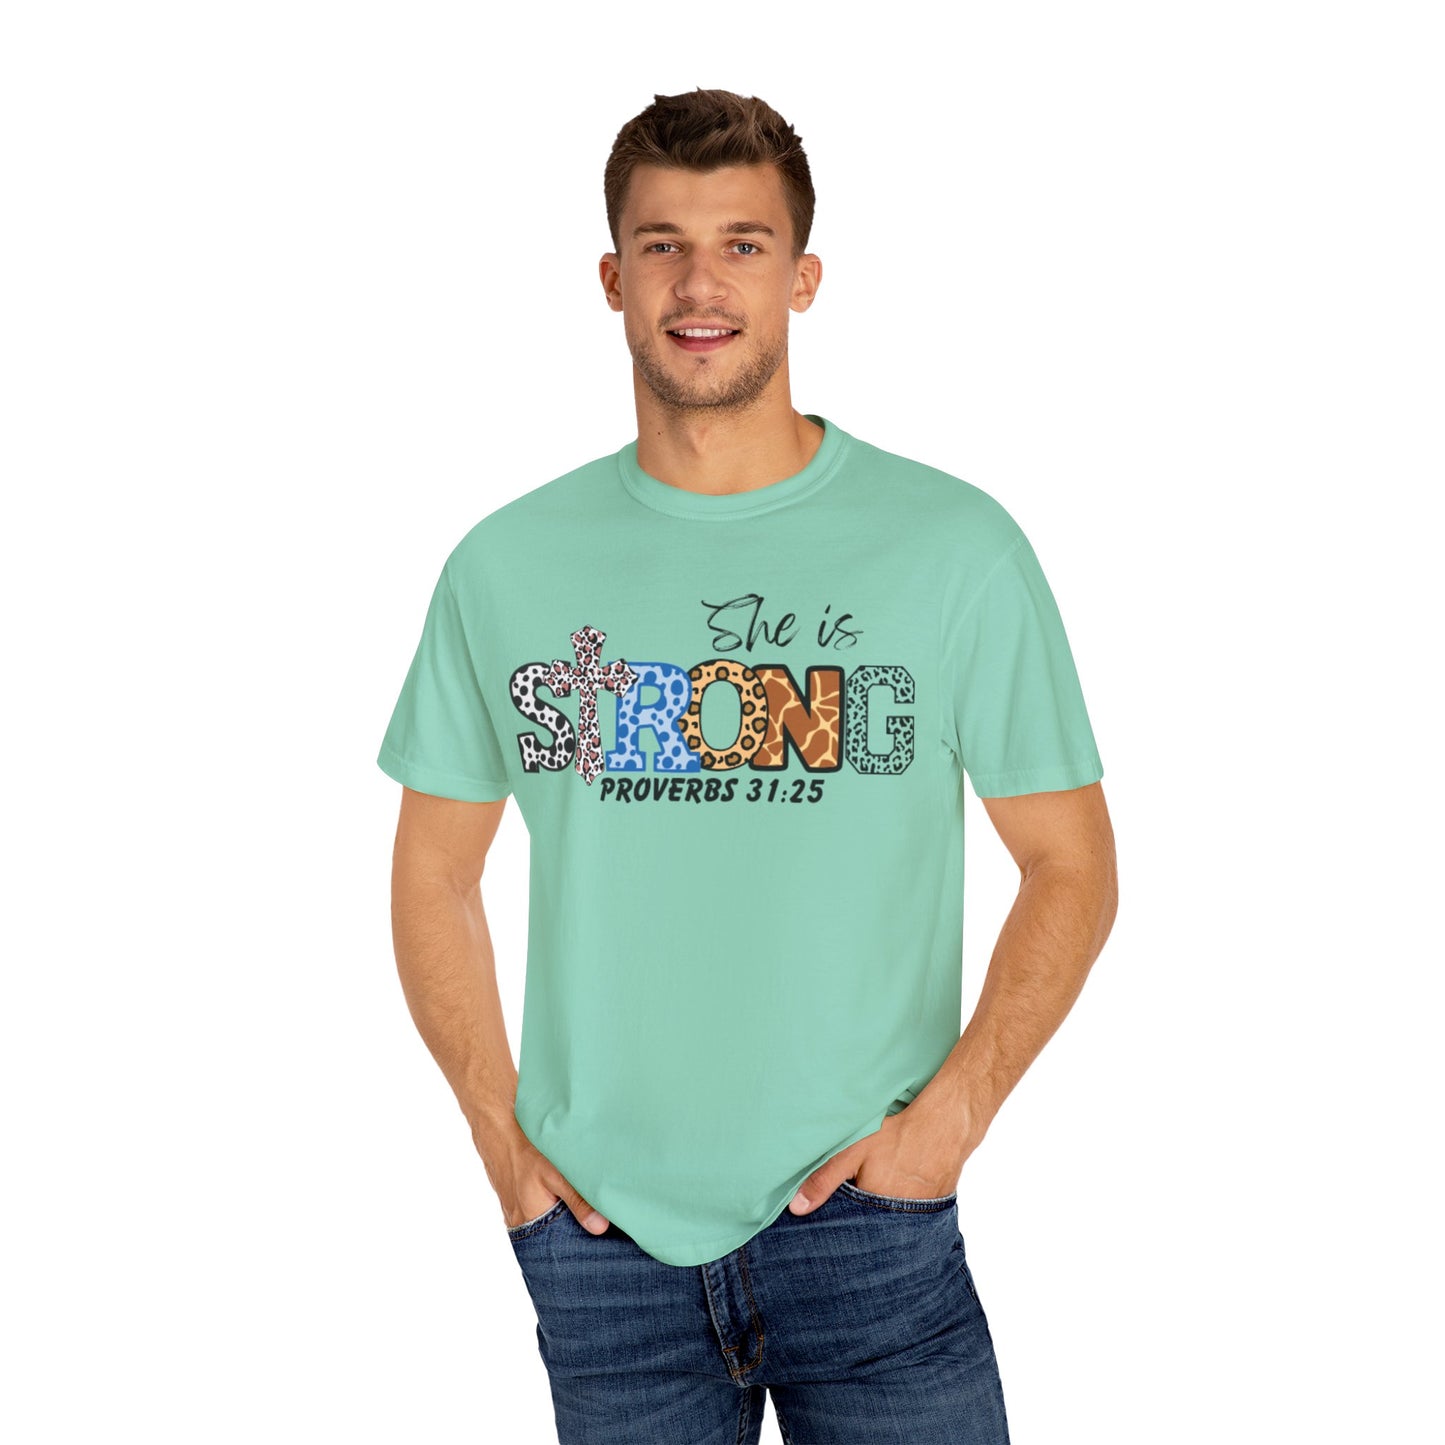 She is Strong Unisex Garment-Dyed T-shirt